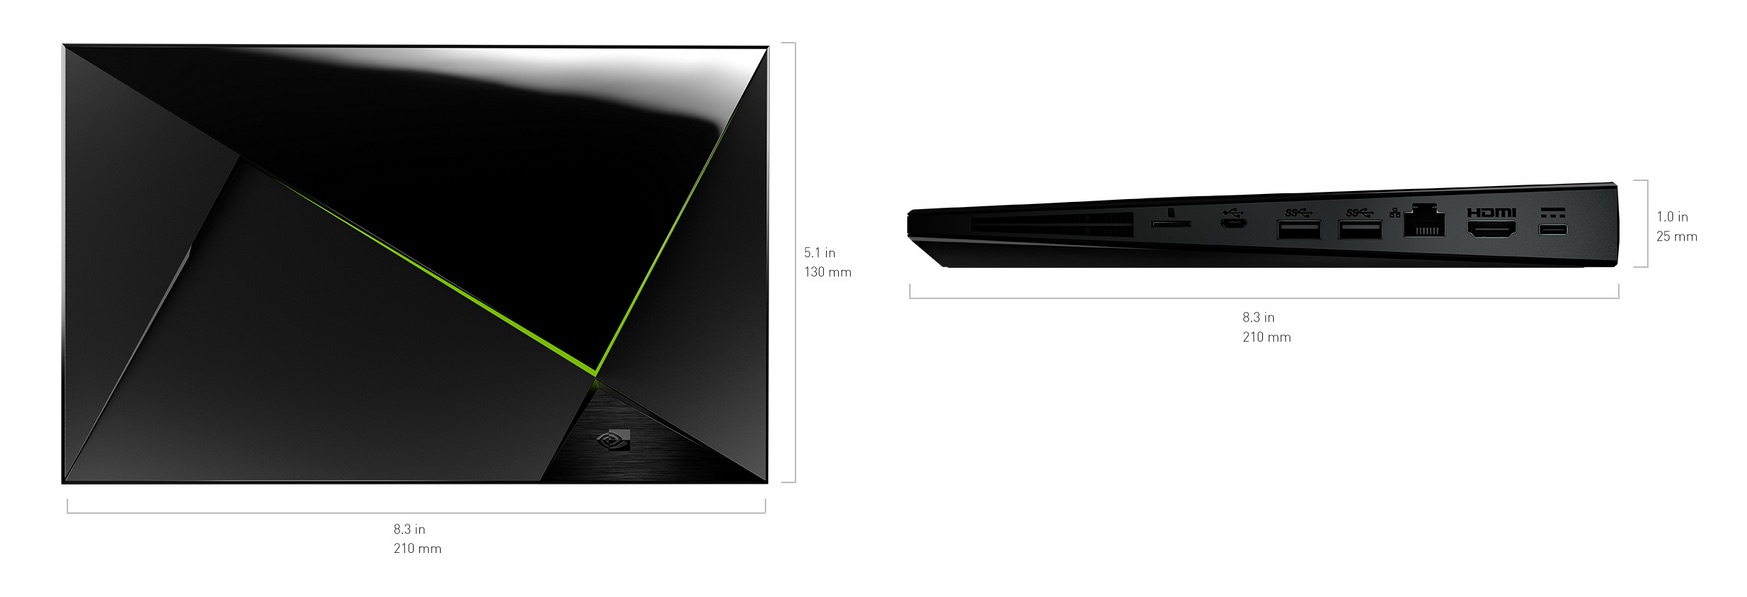 Nvidia Shield Android TV - Dimensions et Ports